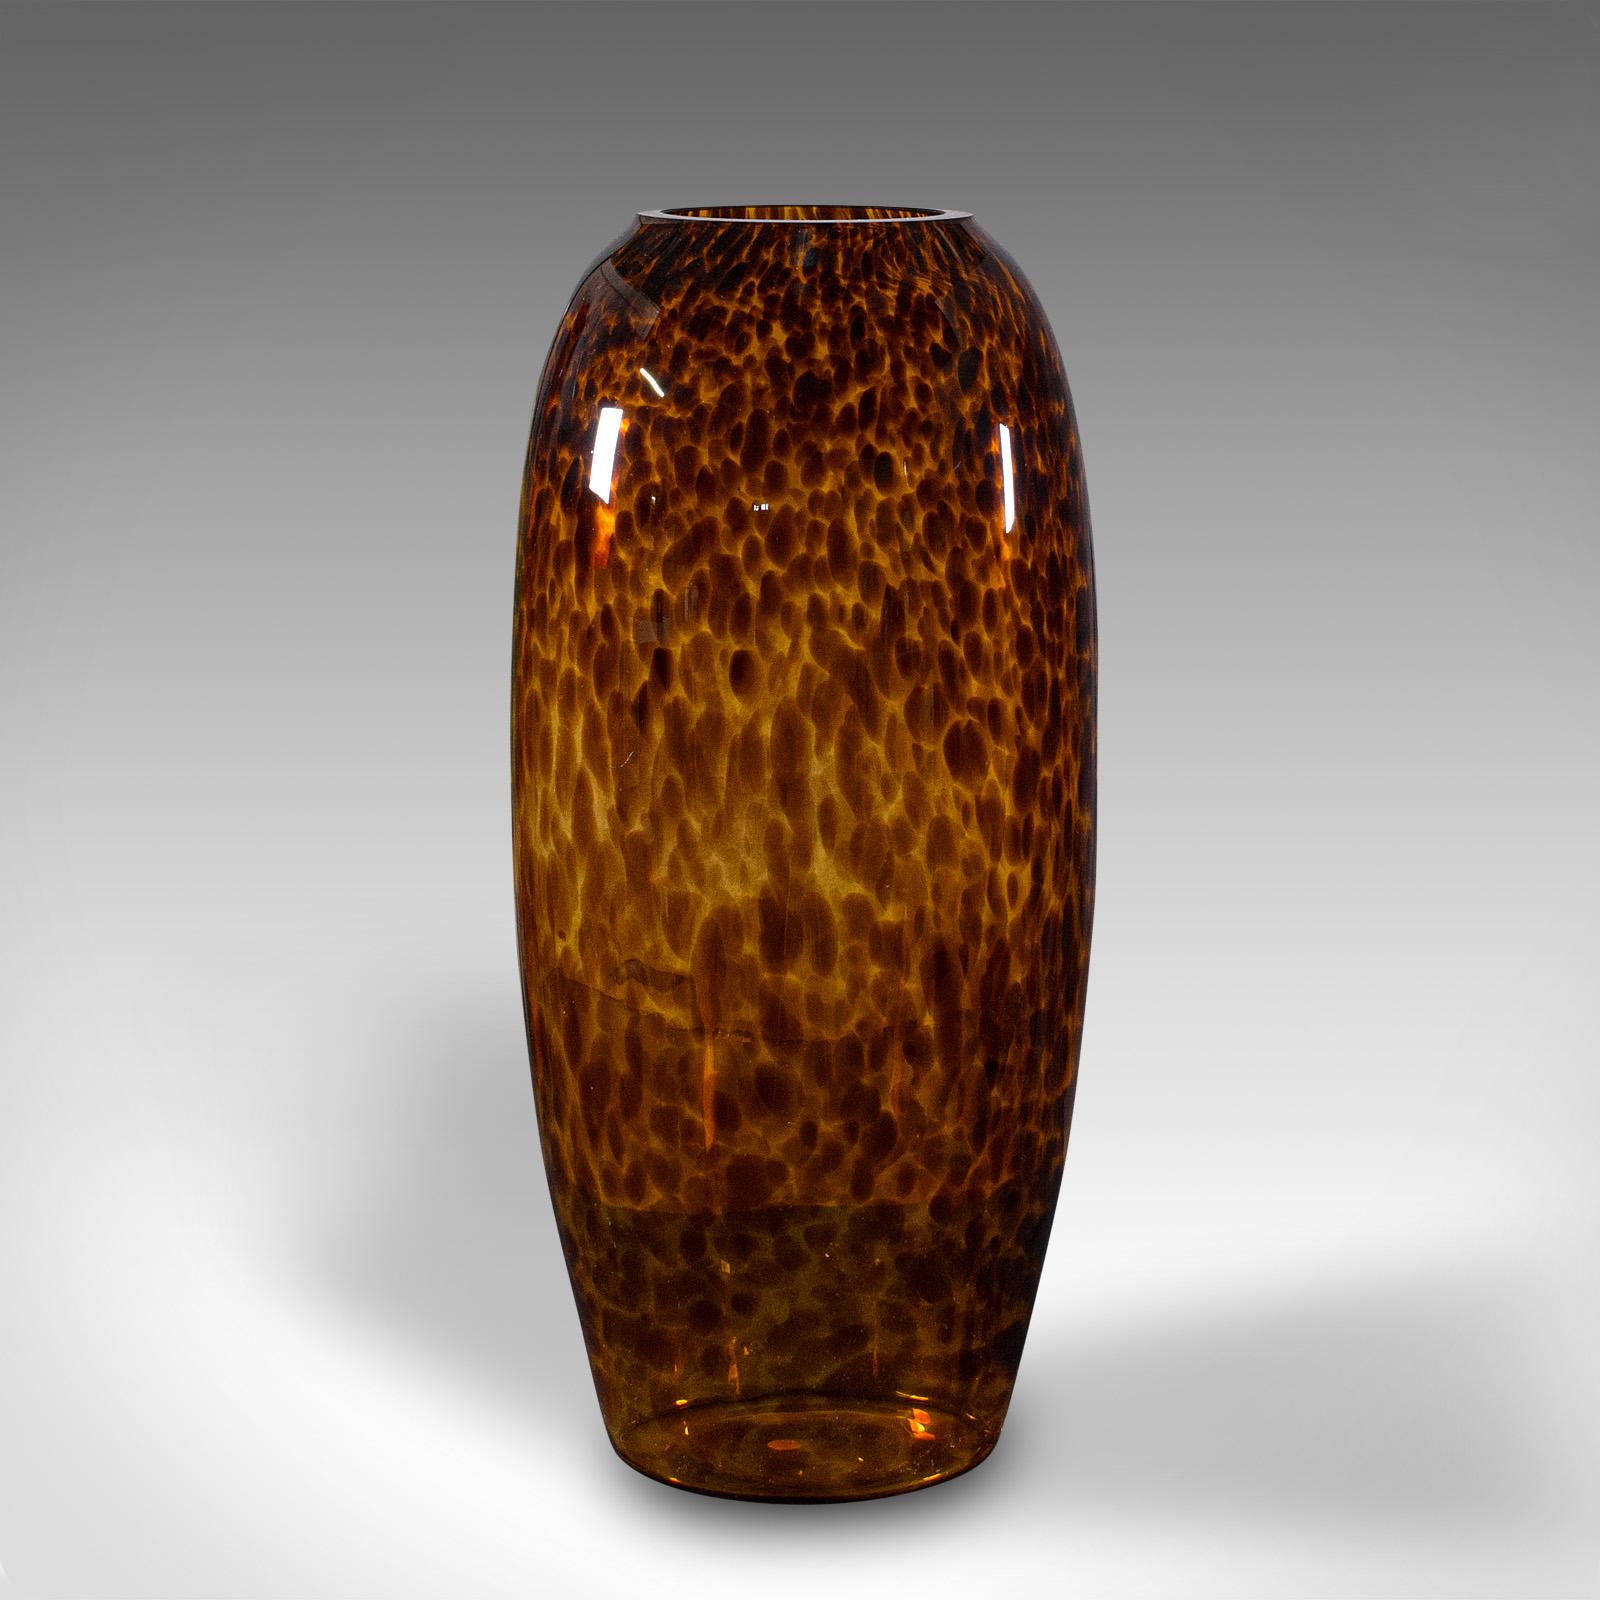 This is a tall vintage amber vase. An Italian, art glass flower sleeve with decorative pattern, dating to the late 20th century, circa 1970.

Striking colour and form, a delightful expression of the period
Displays a desirable aged patina and in